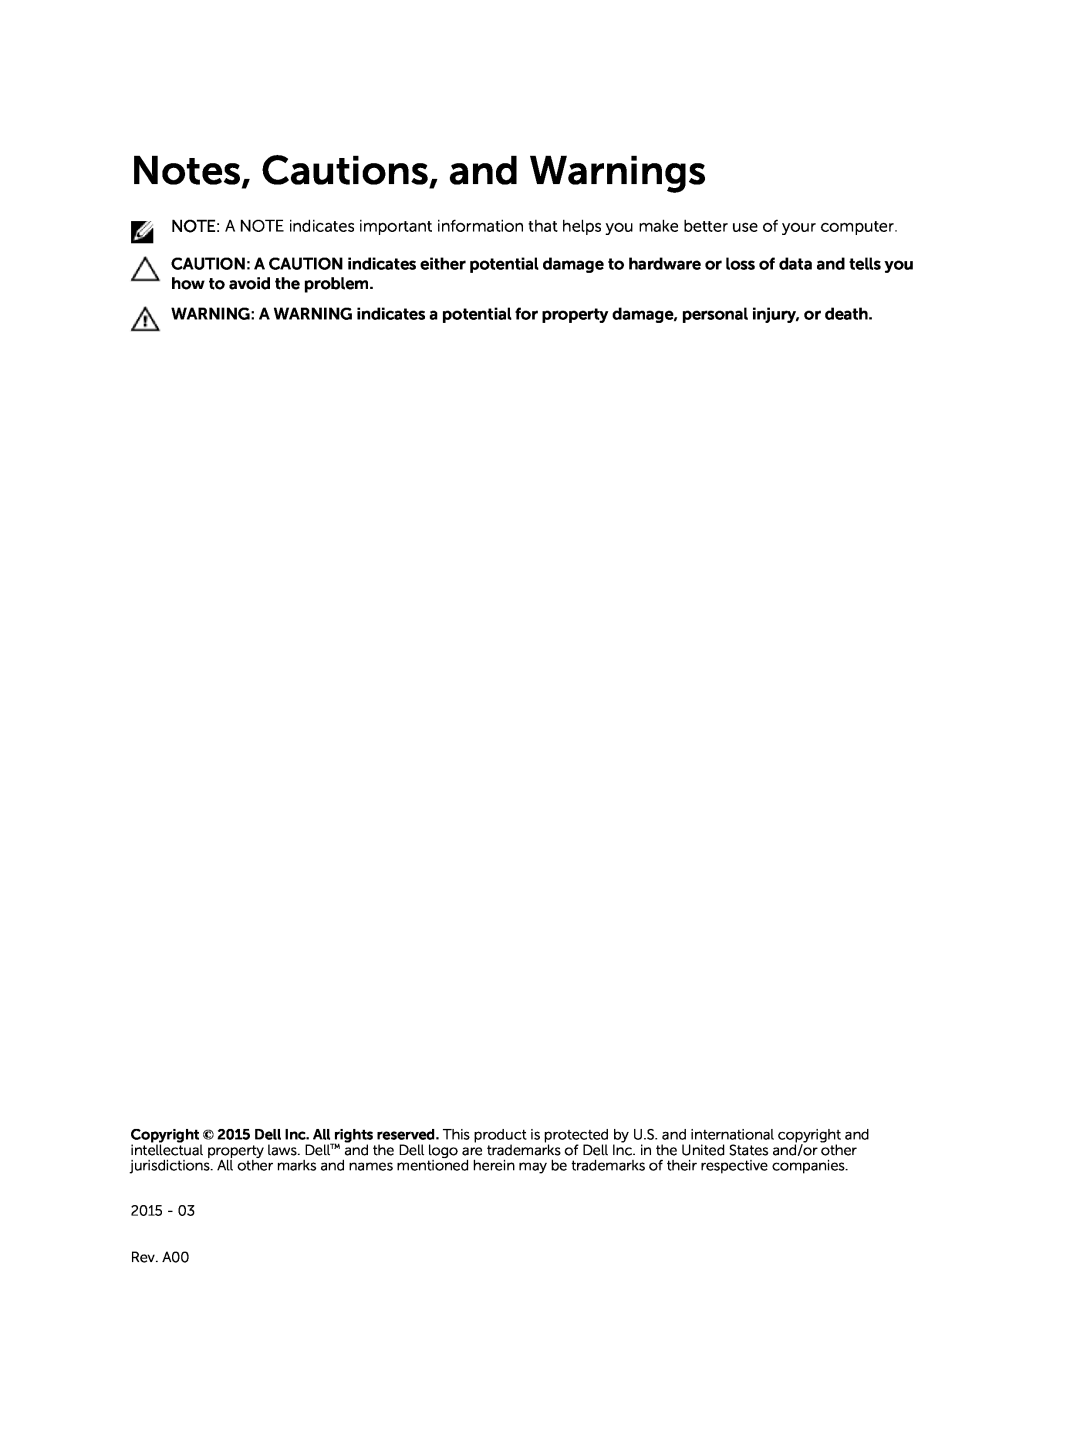 Dell E11J001 owner manual Notes, Cautions, and Warnings 